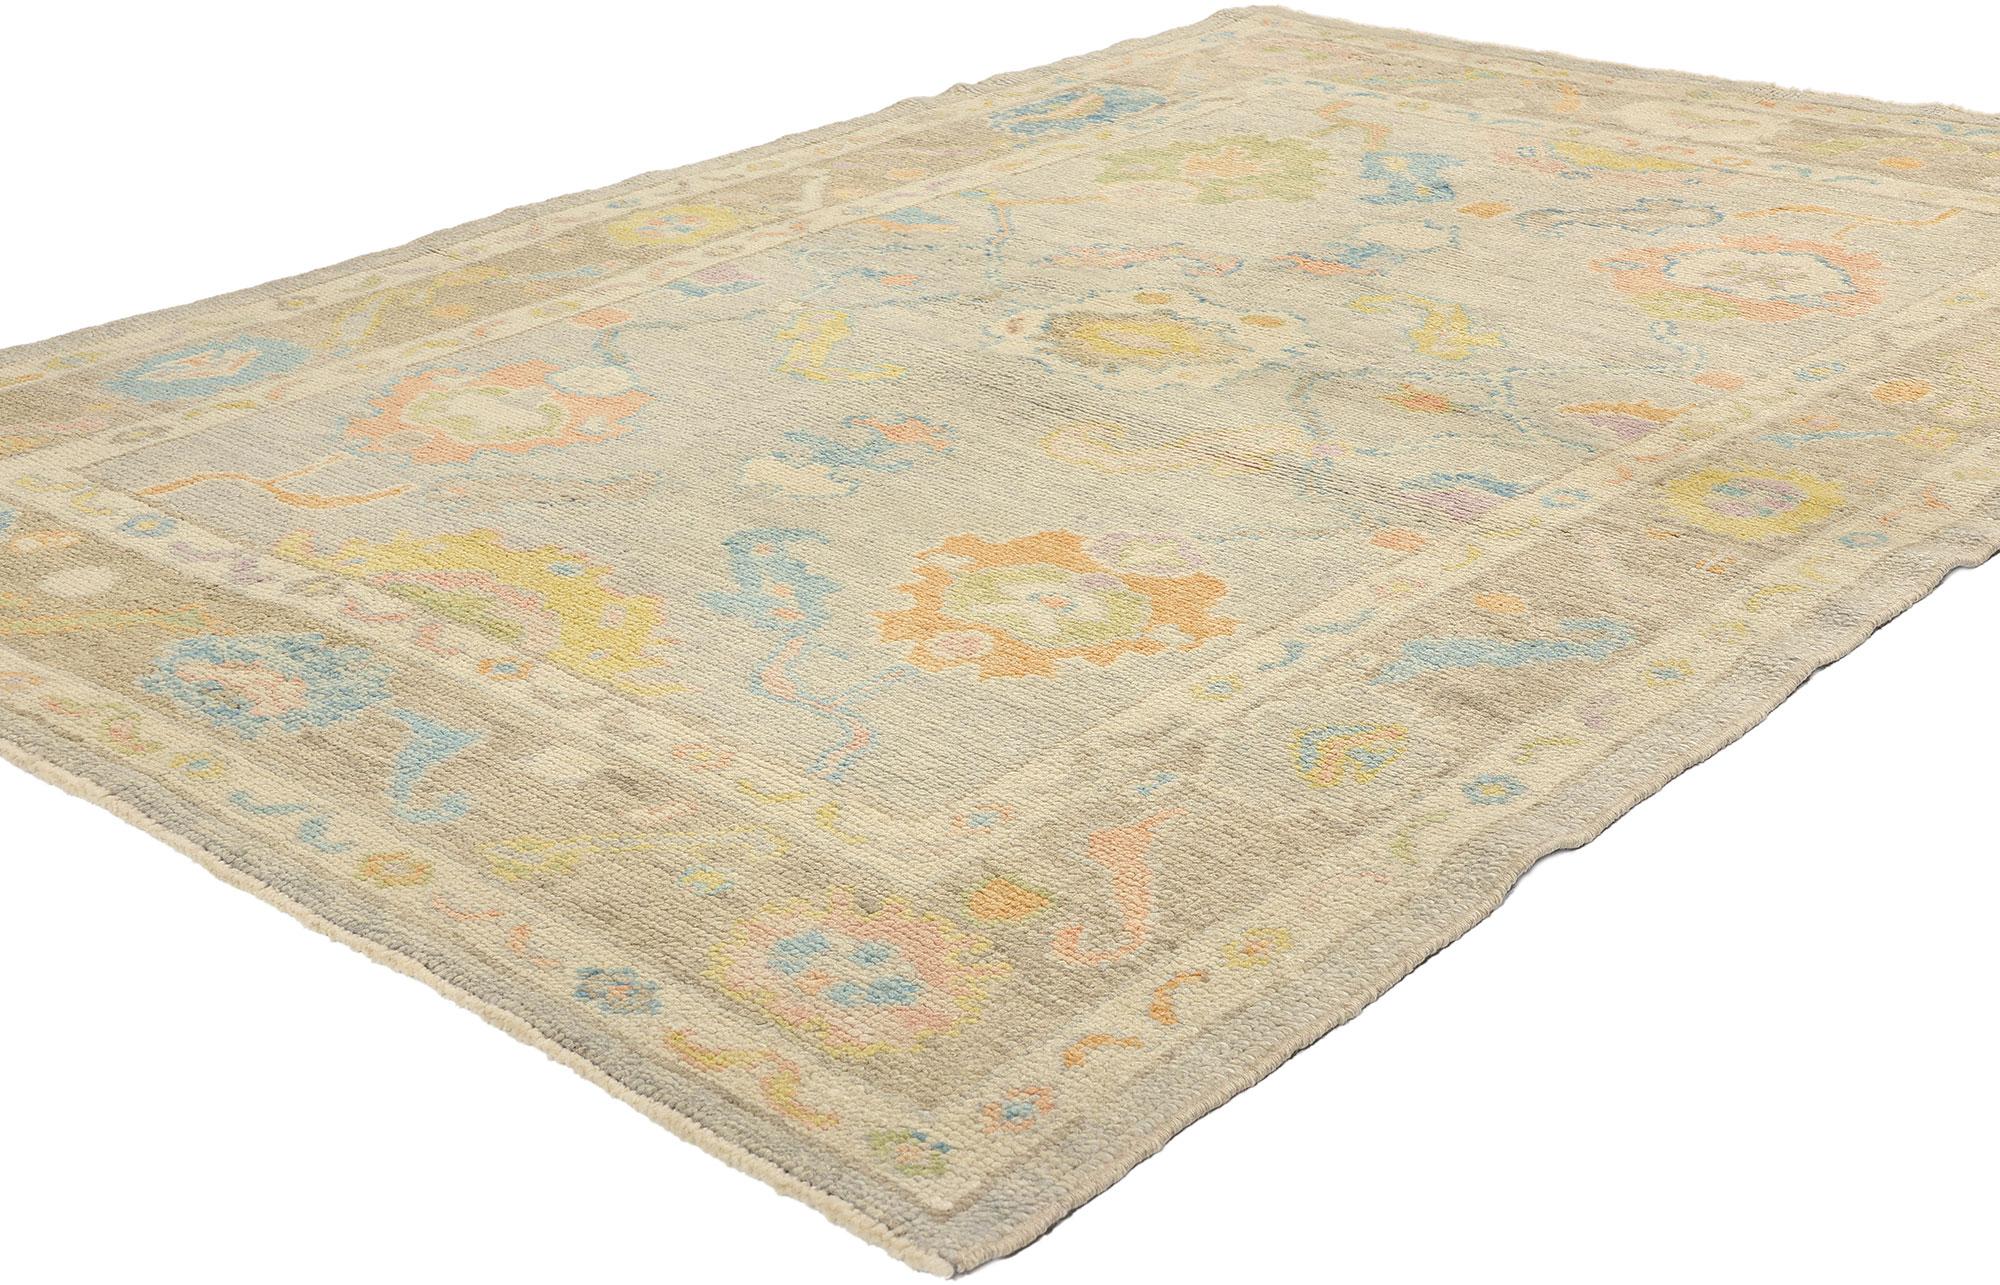 53593 New Colorful Turkish Oushak Rug, 05'02 x 07'04. In this captivating fusion, the cozy allure of Boho Chic intertwines seamlessly with the timeless elegance of Grandmillennial style, embodied within the intricate design of a hand-knotted wool